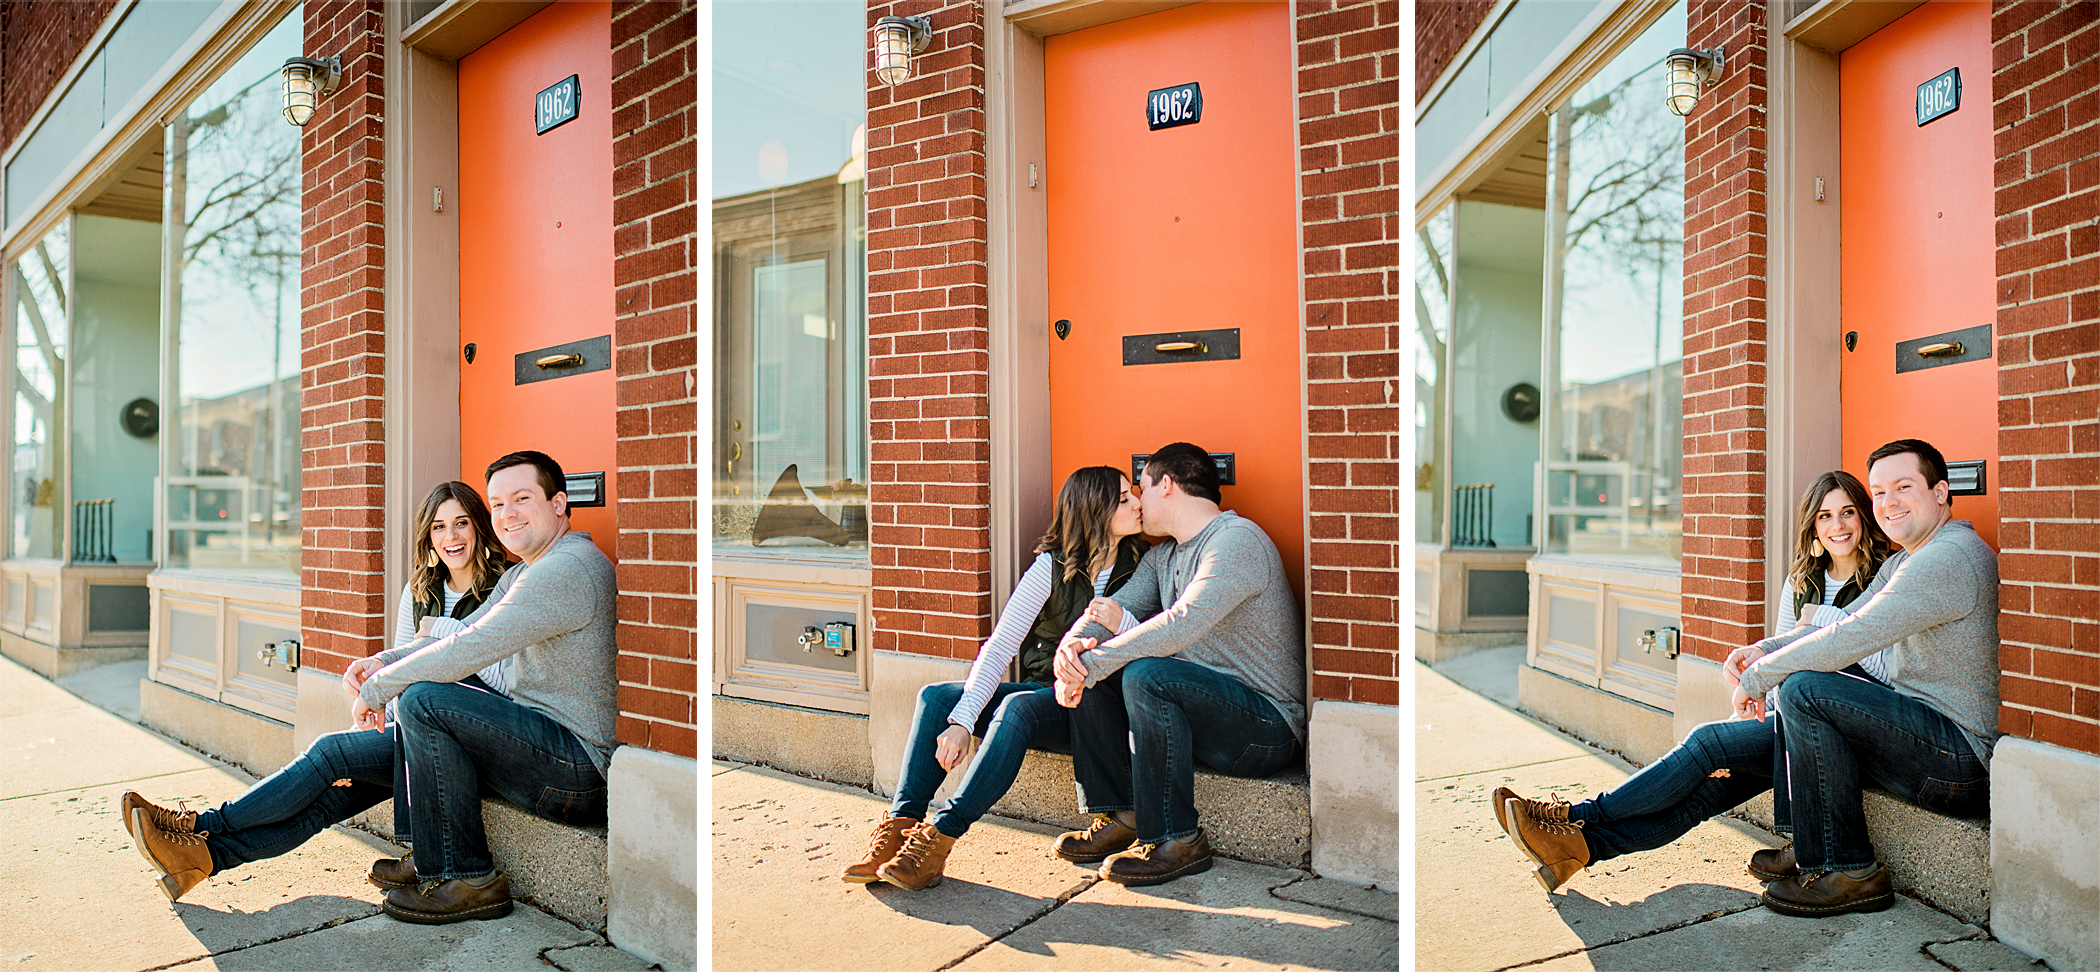 Atwood Ave engagement session